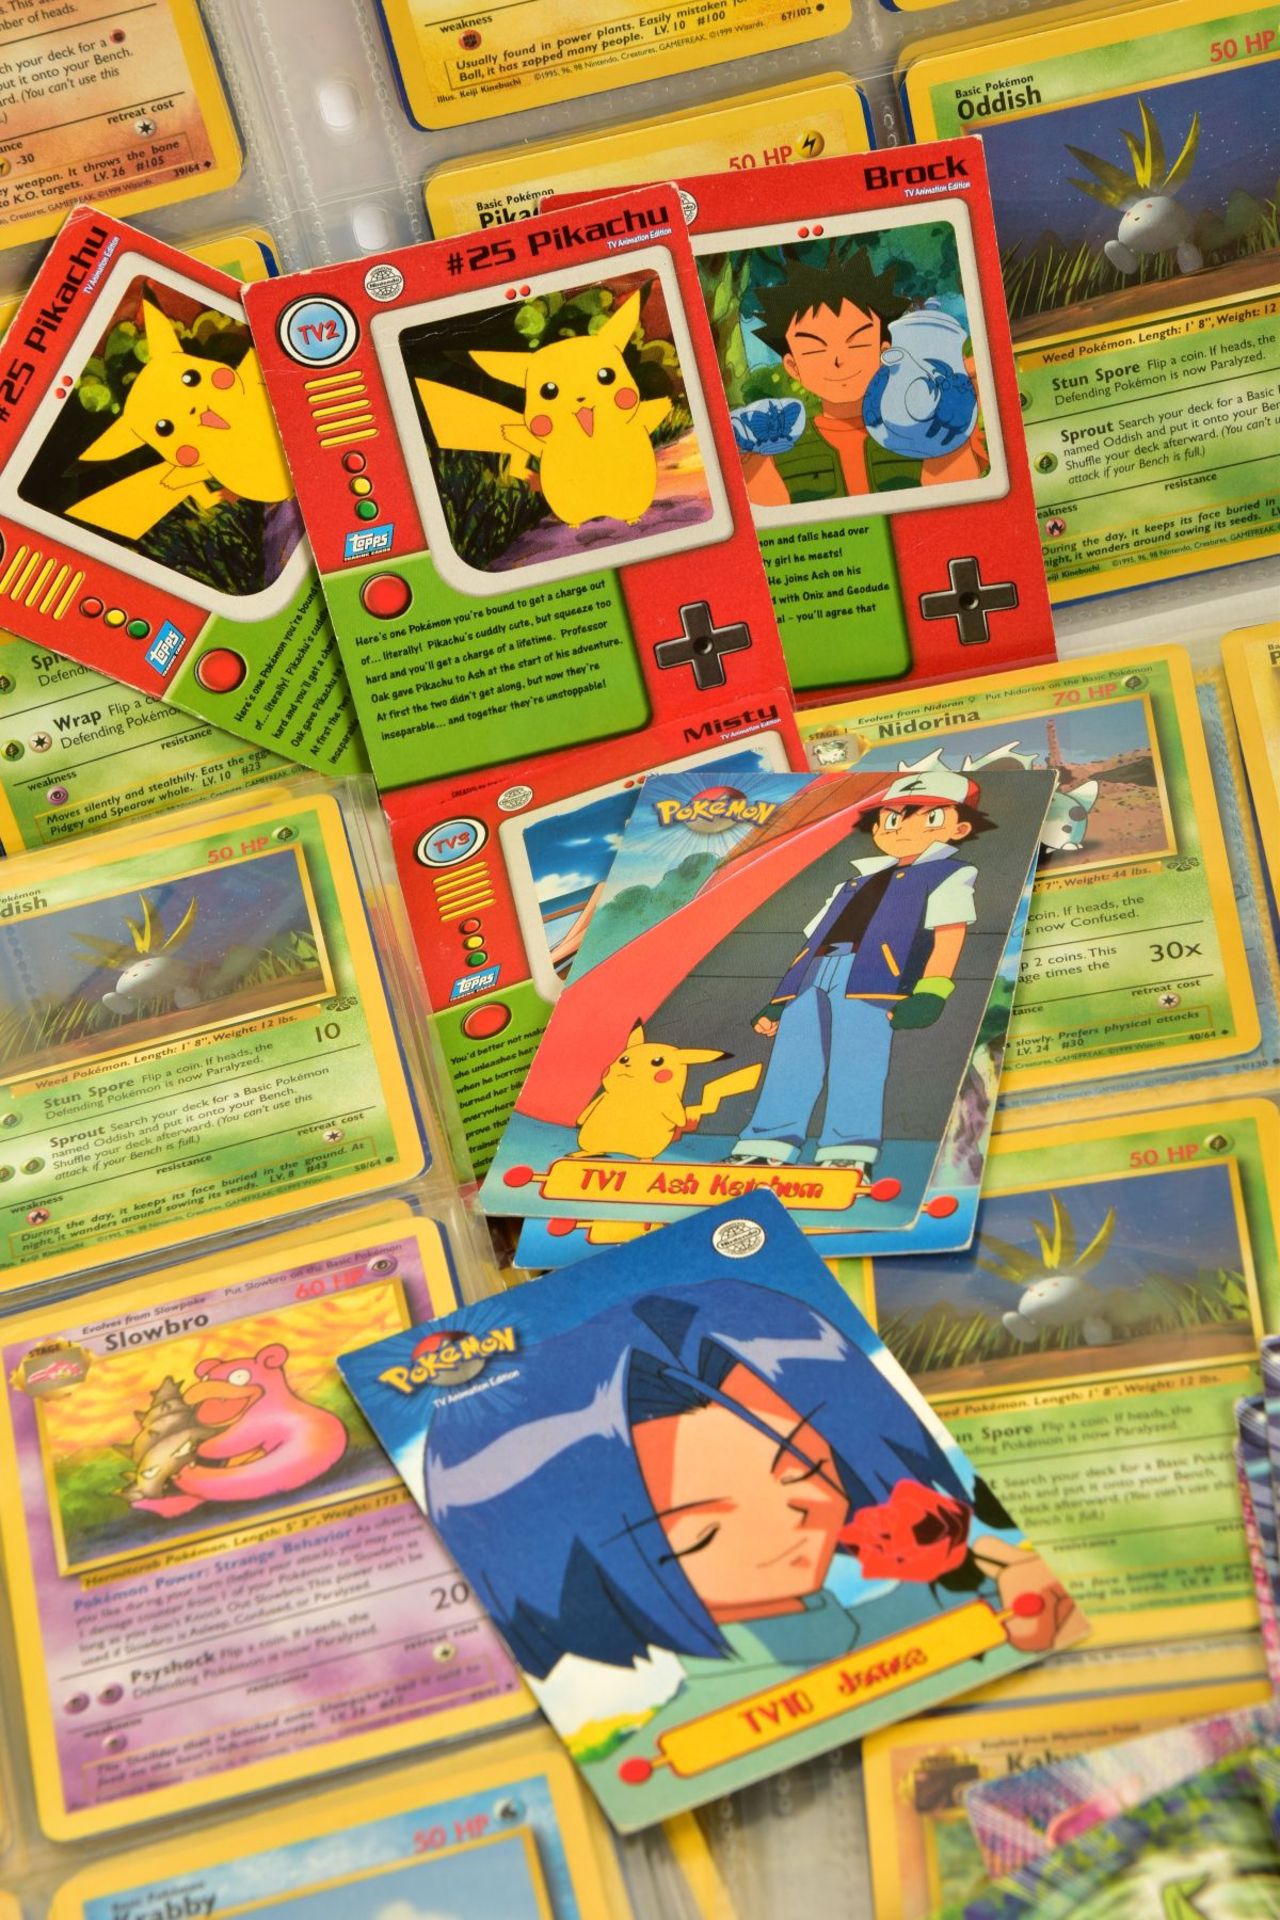 A QUANTITY OF POKEMON CARDS, just over 450 Pokemon TCG cards from Base Set, Base Set 2, Fossil, - Image 5 of 58